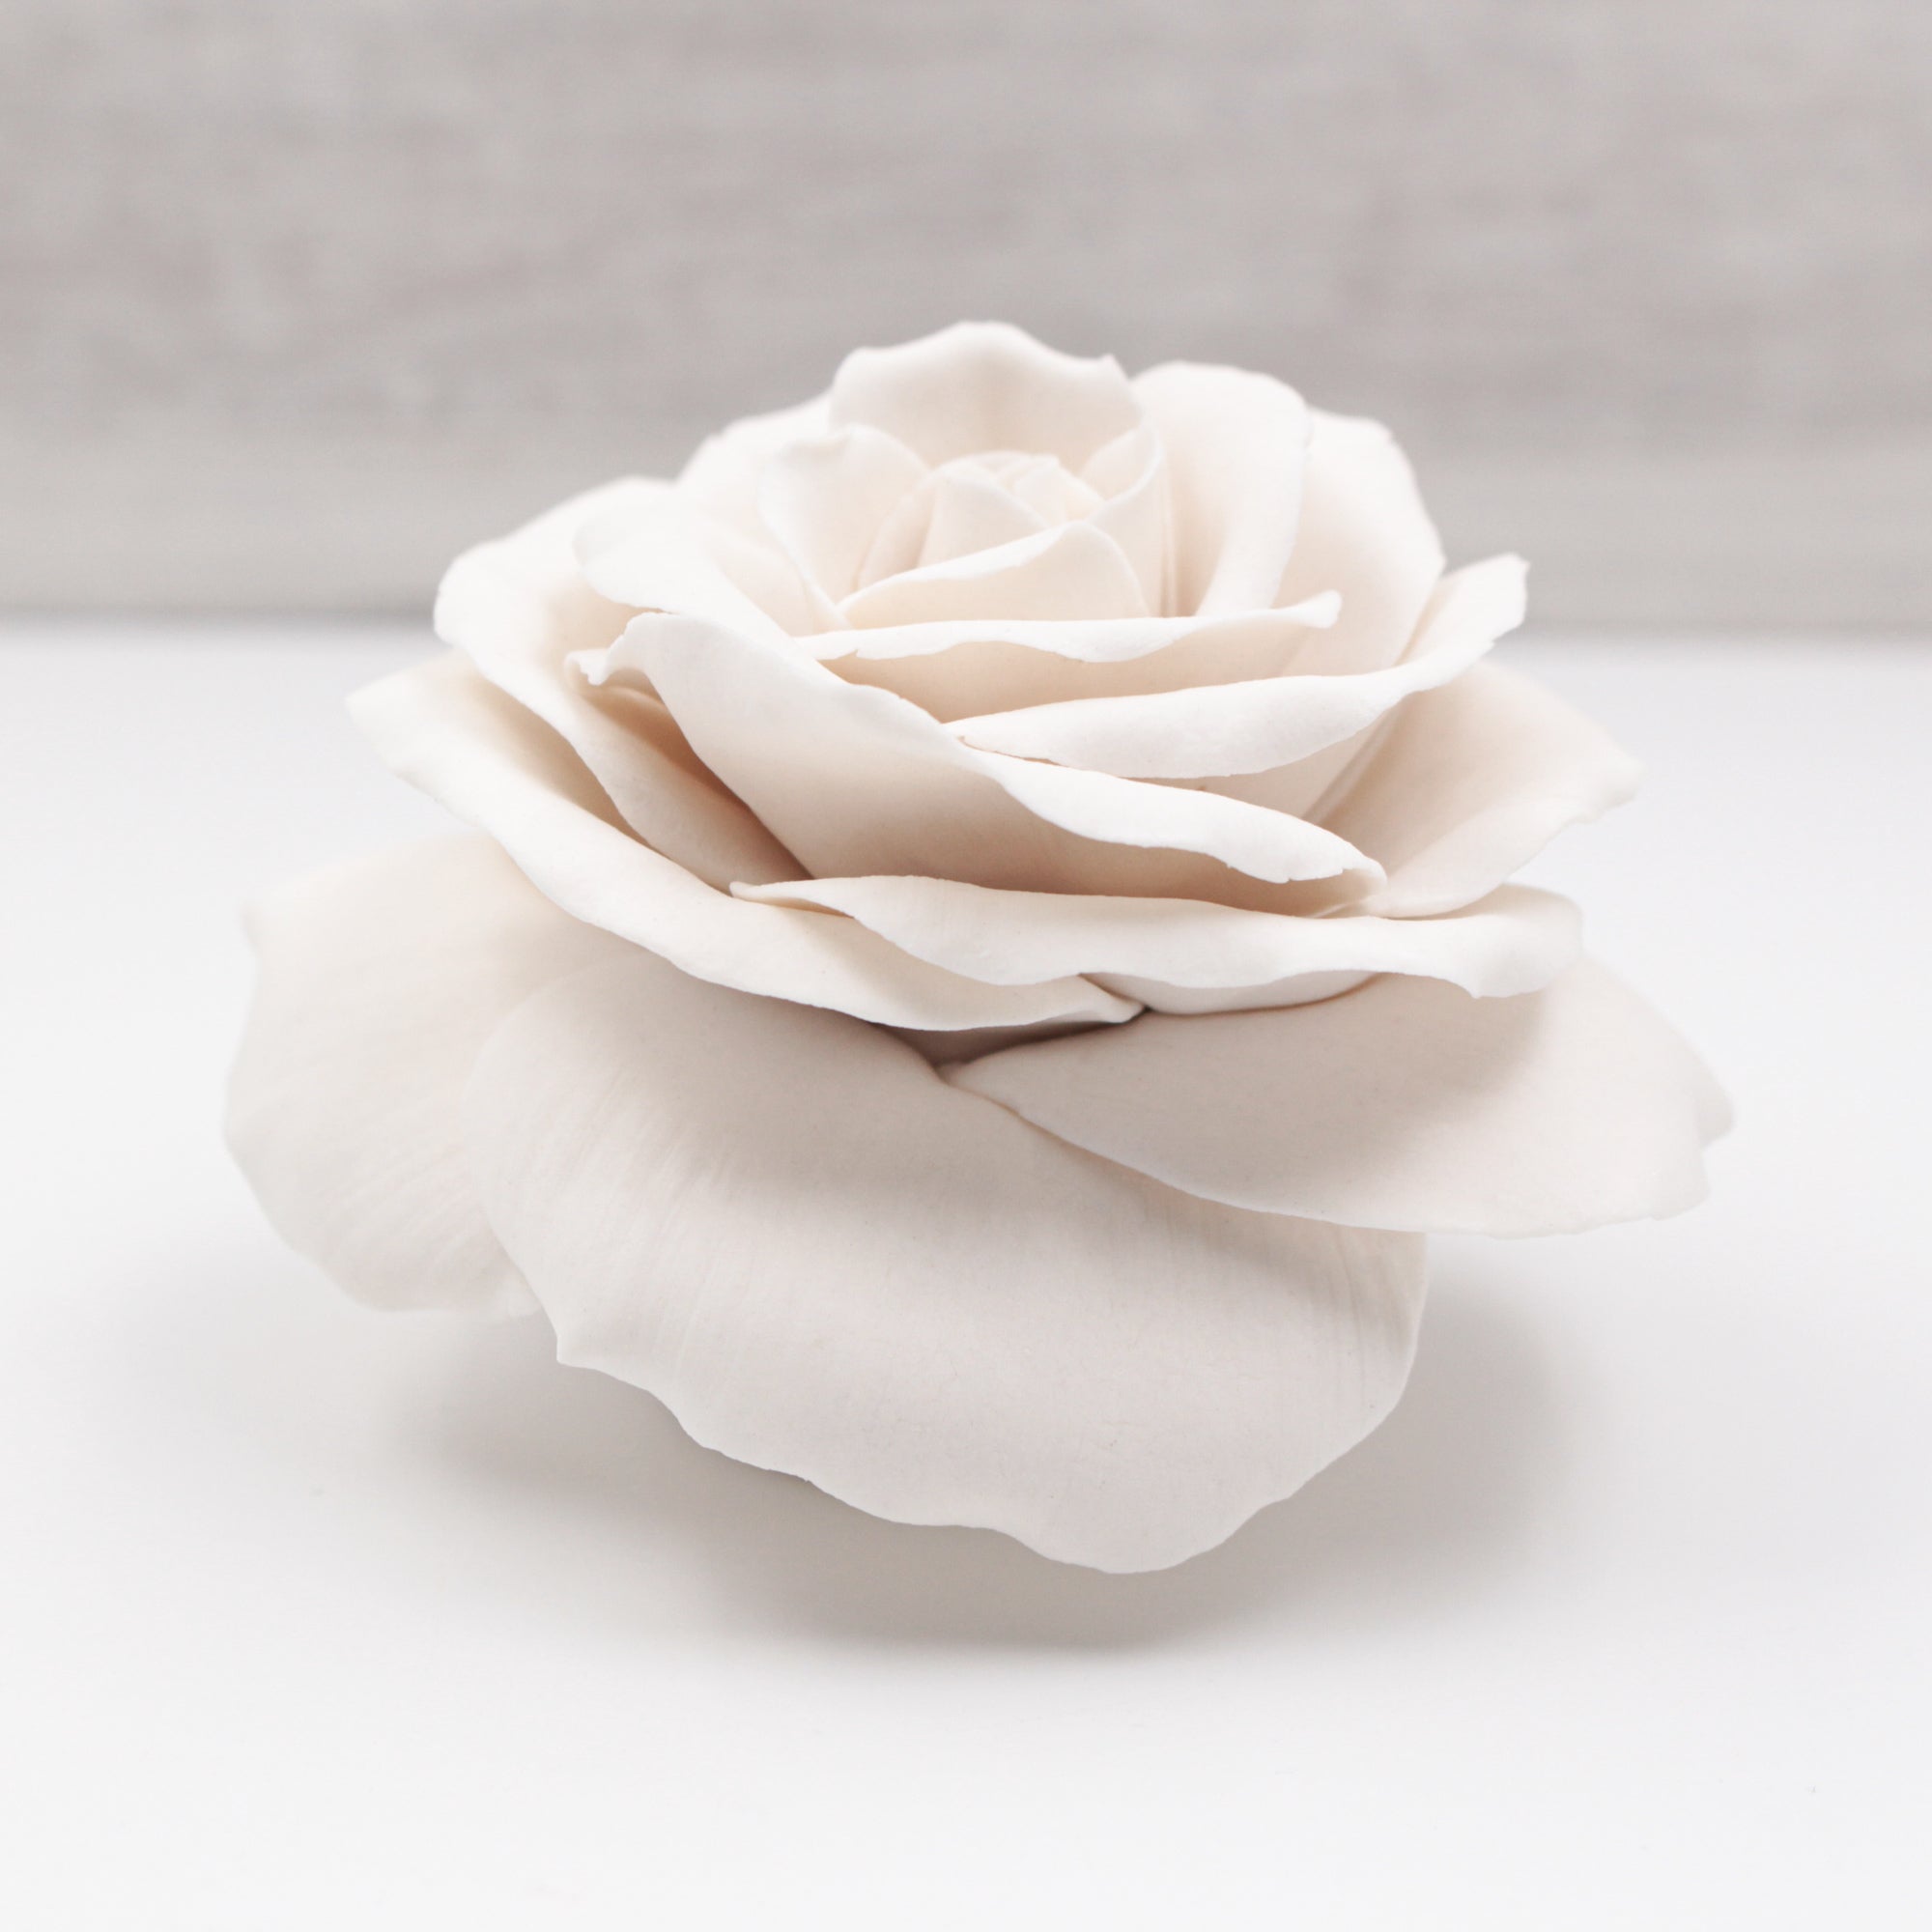 Porcelain Rose - Handmade Porcelain Flower for Interior and Event Decoration - Made in France by Alain Granell – Home and Wall Decoration